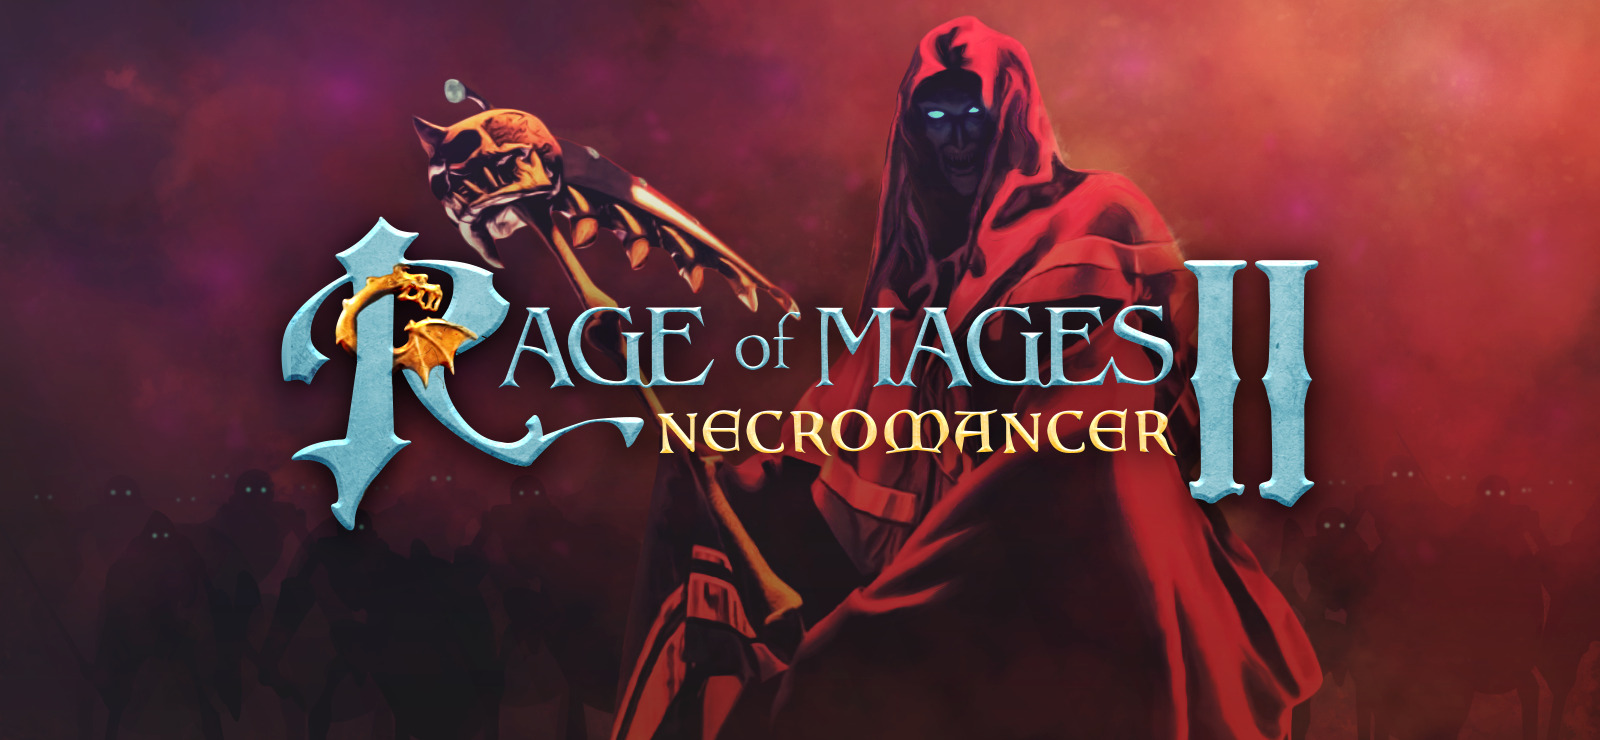 Rage of mages steam фото 72